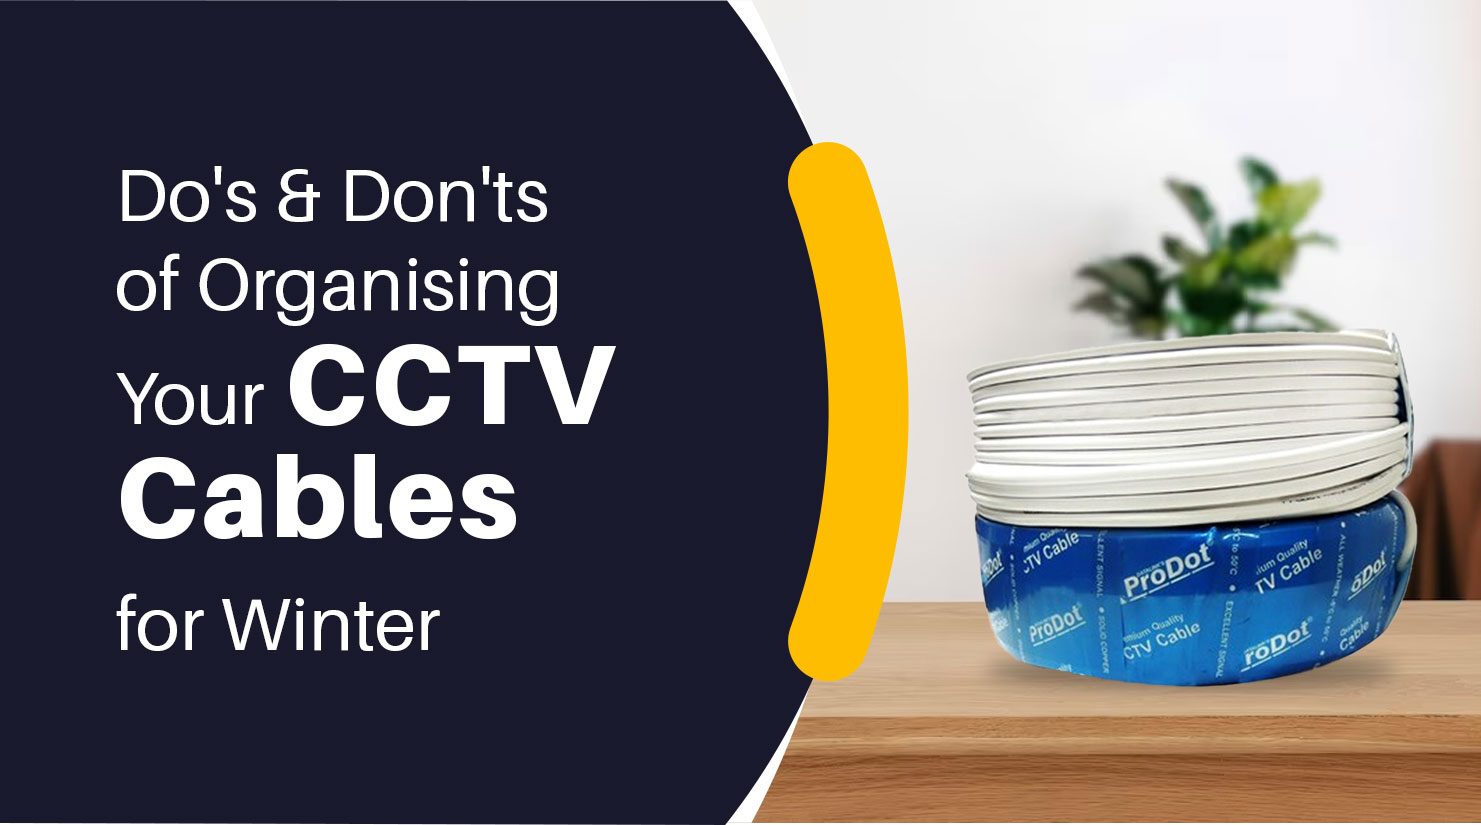 do's and don'ts of organising your cctv cables for winter 